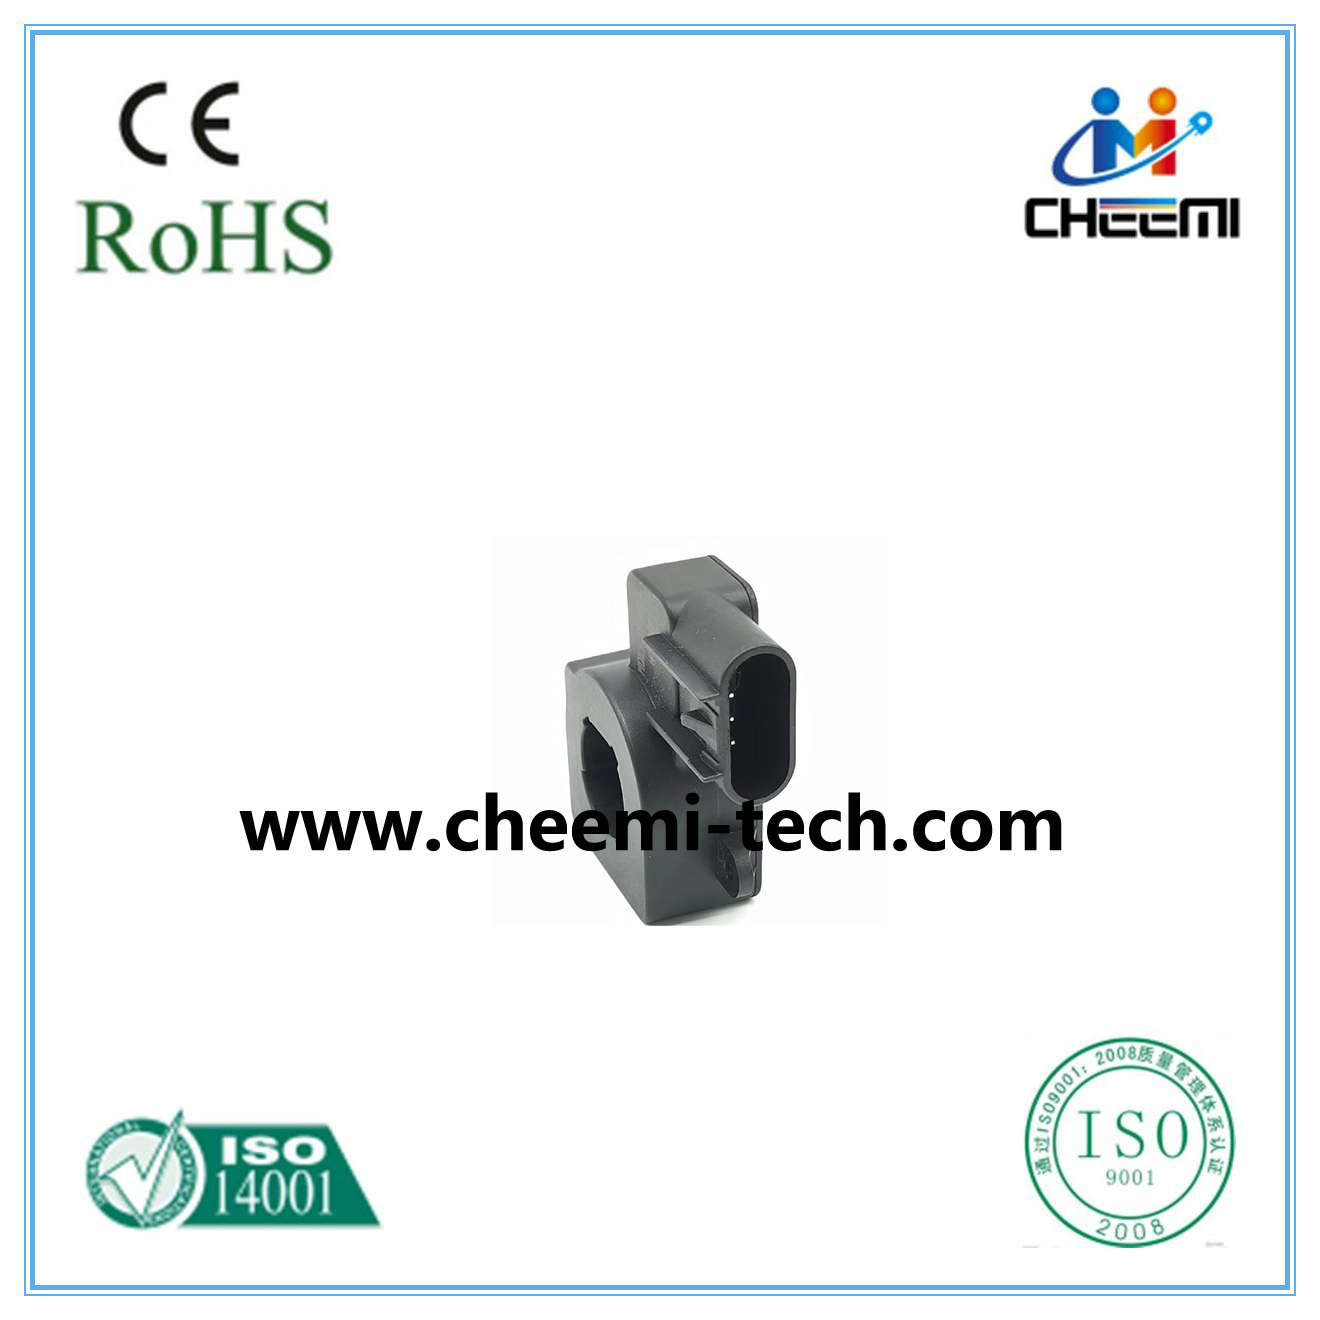 Two Channels current detecting current transducers CHK-DHAB5S2L widely used in New energy Vehicles